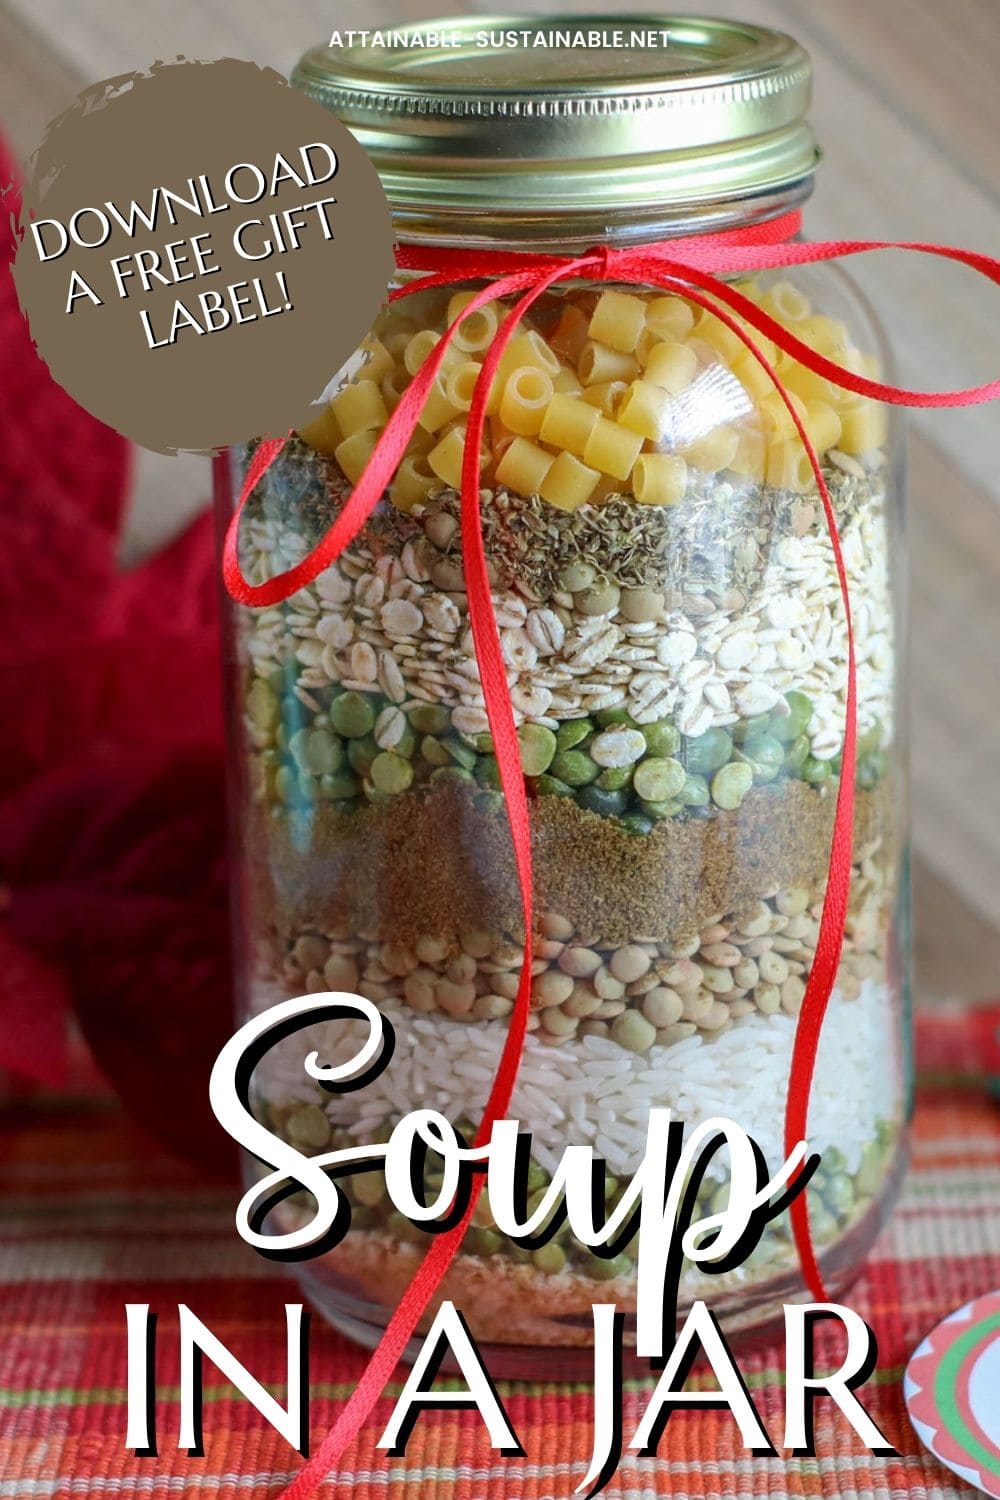 Friendship Soup in a Jar » Contained Cuisine